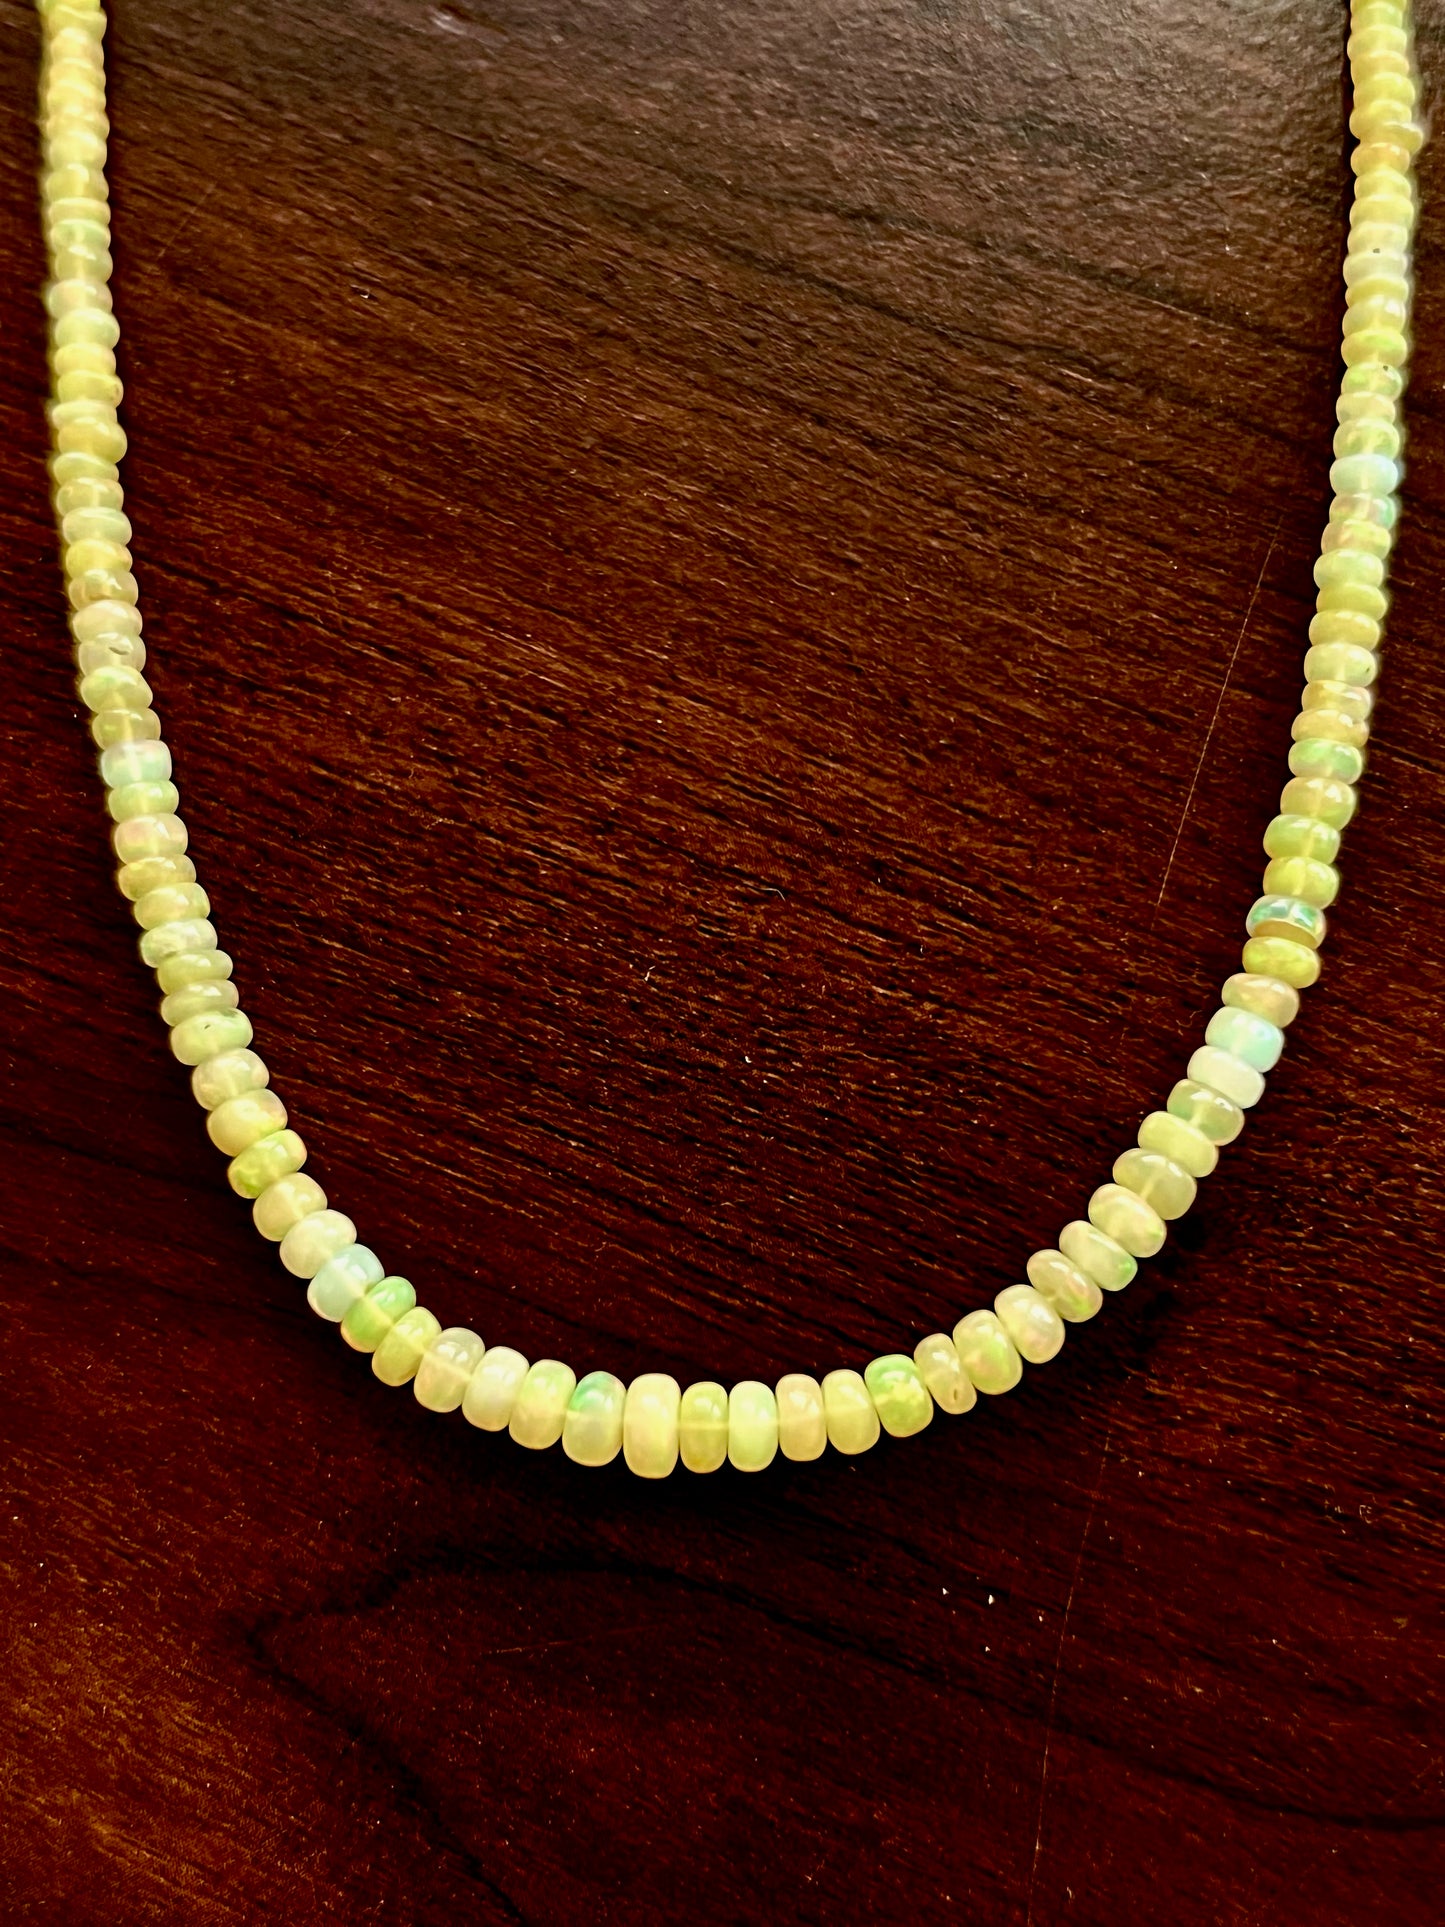 Ethiopian Opal graduated bead necklace with 18KY gold 'S' clasp and cultured pearls